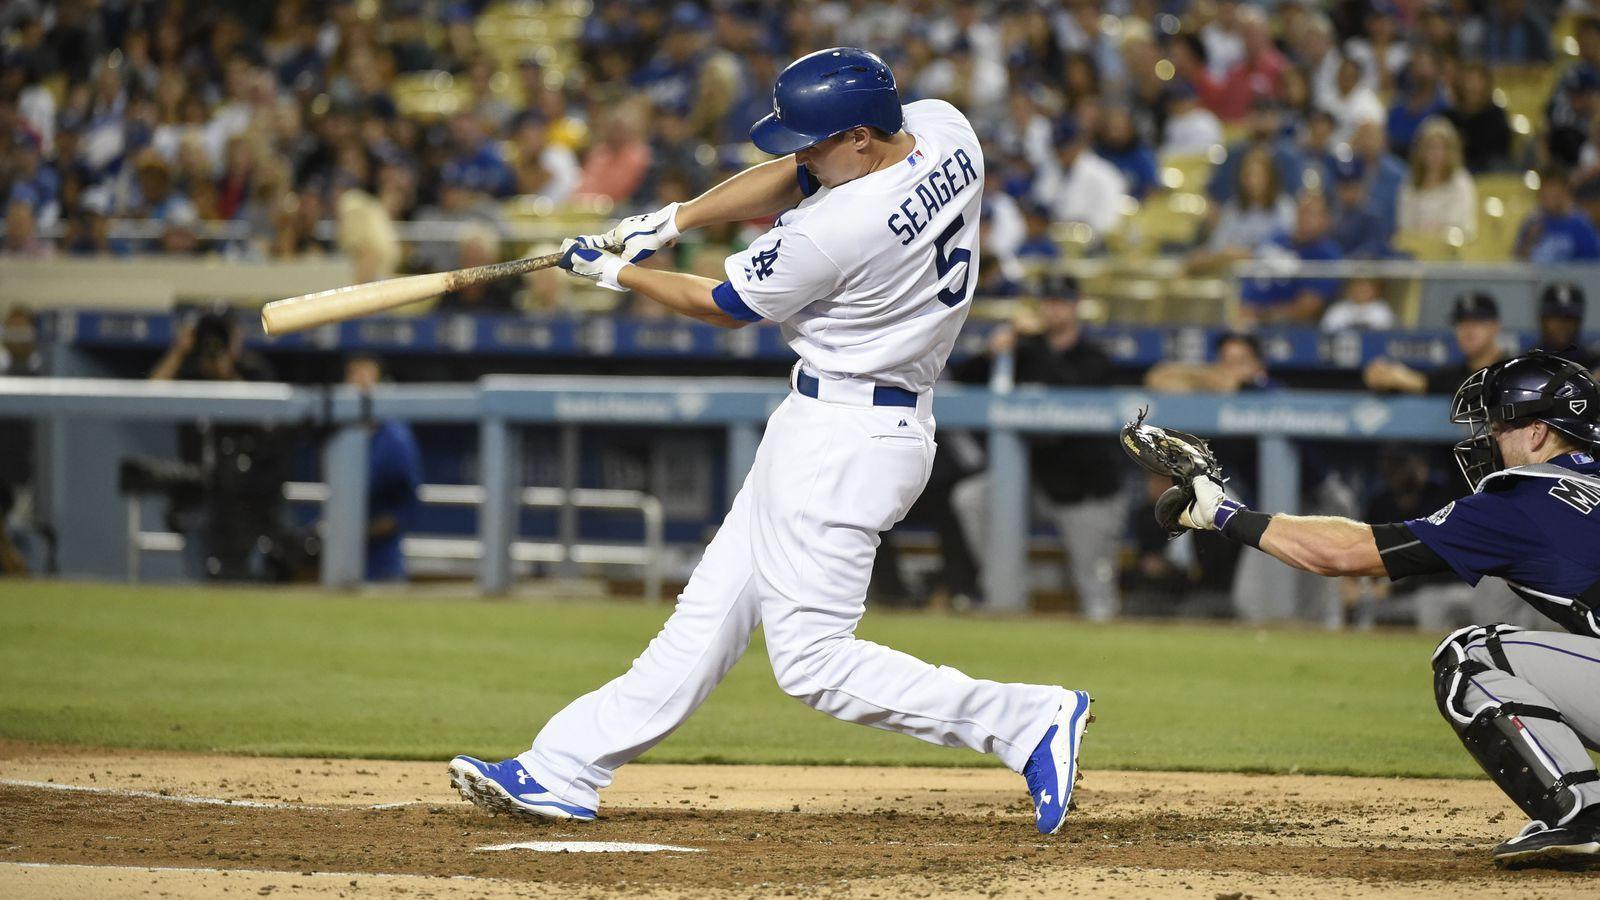 Corey Seager Wallpapers - Wallpaper Cave